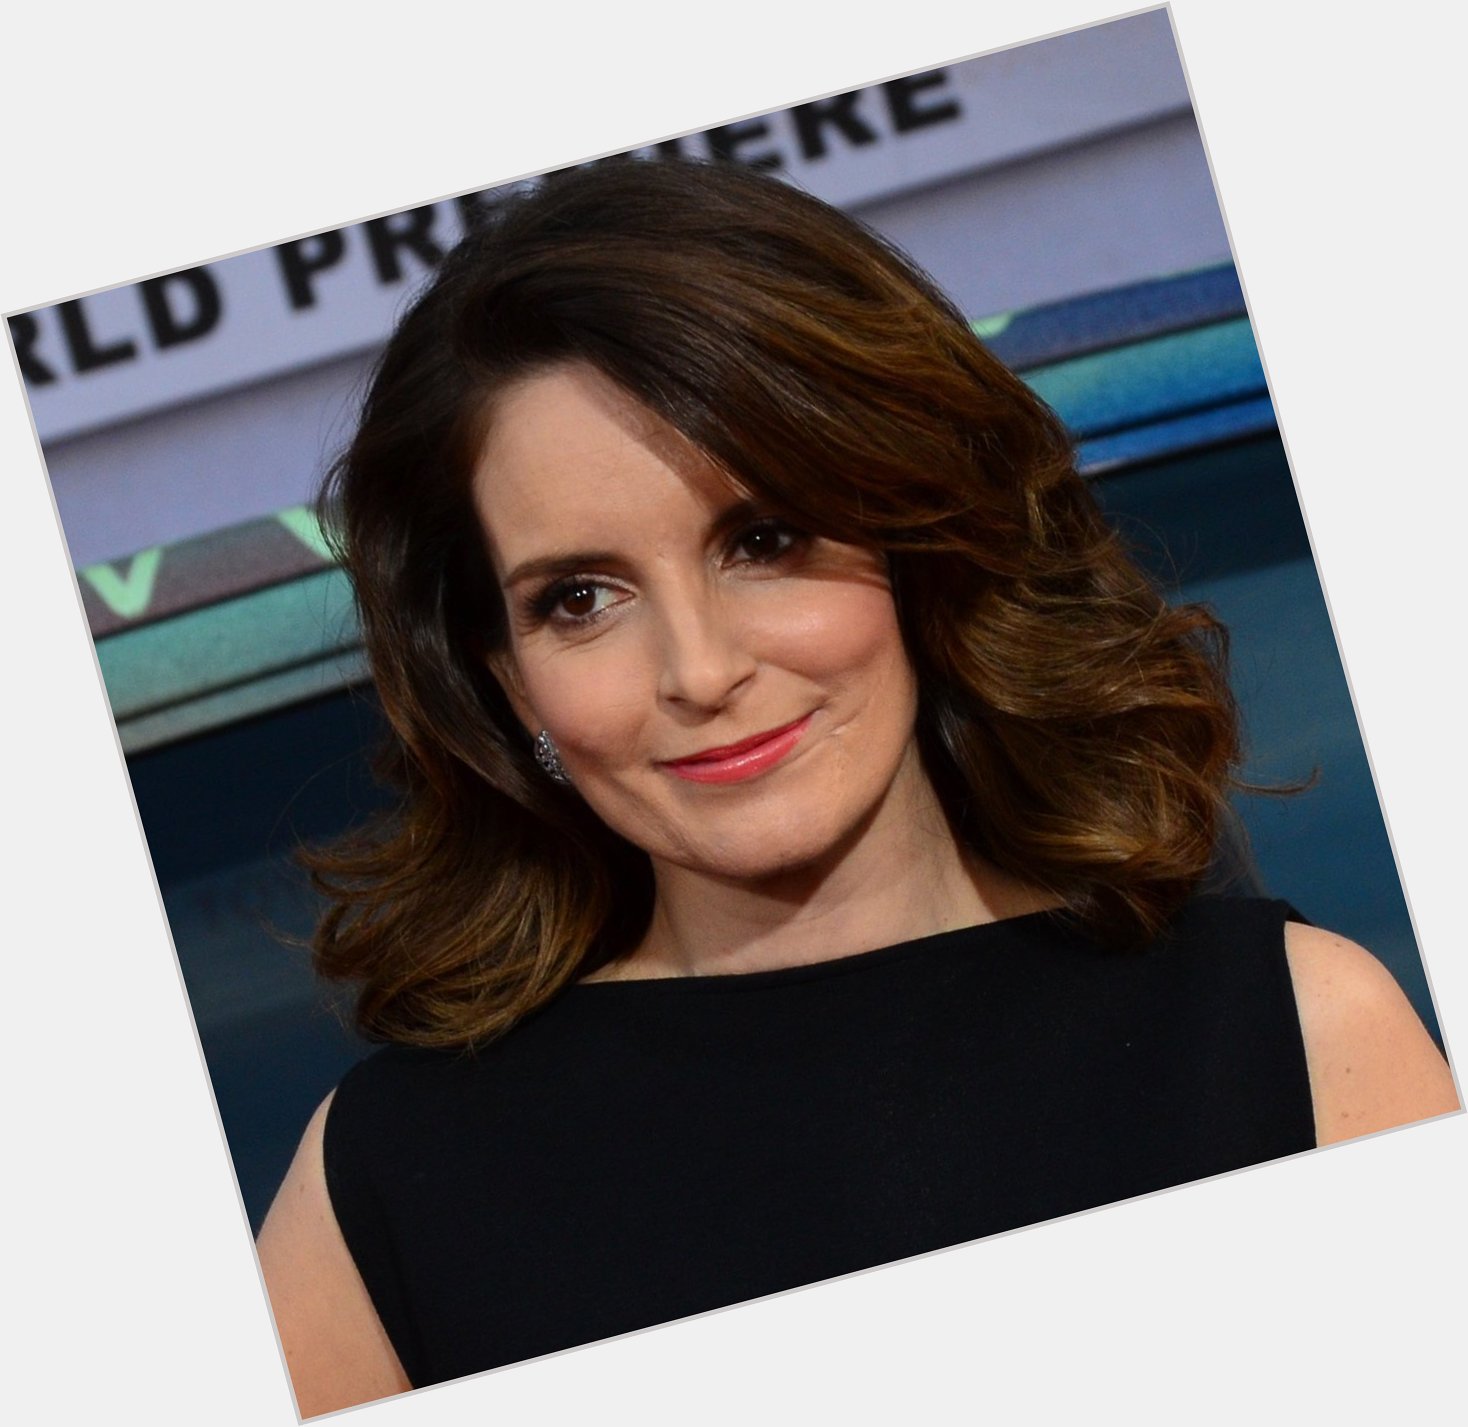 Happy birthday to ms tina fey 
truly one of my idols!!! one of the greatest comedians of our time and an inspiration 